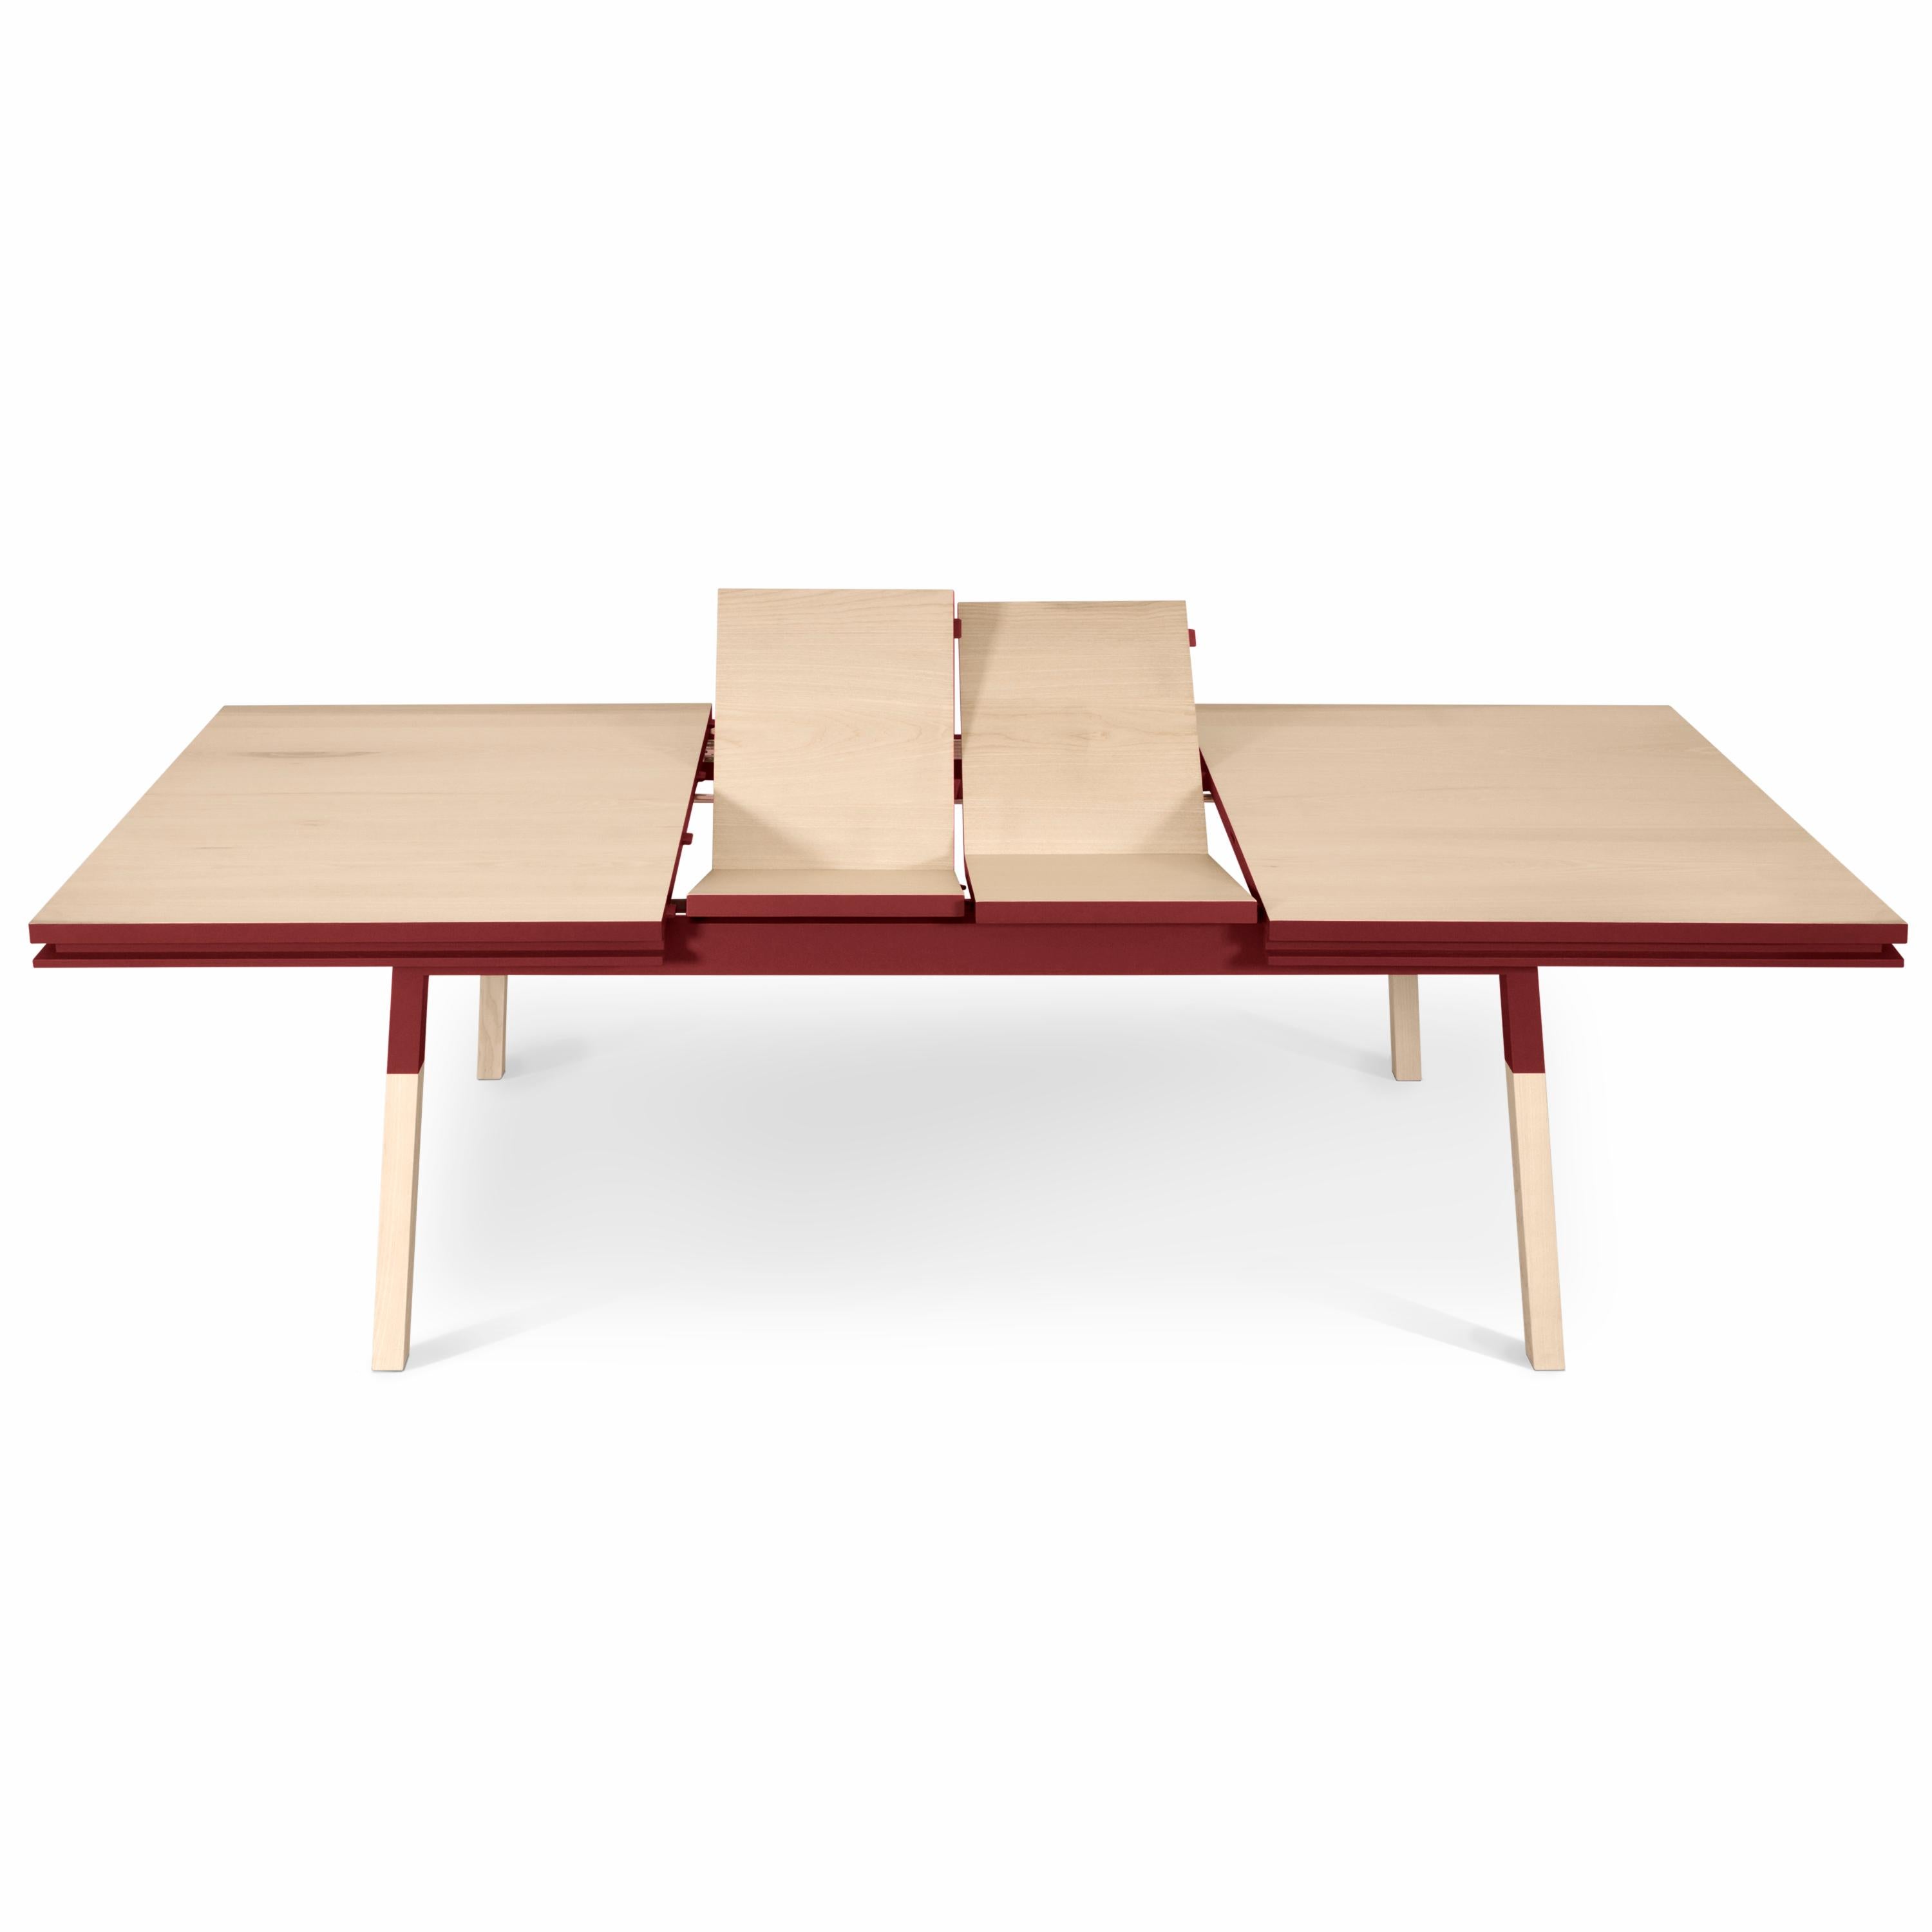 This rectangular dining table is proposed with 2 integrated and folded extensions. 

It is made of 100% solid ash wood from sustainably managed and PEFC certified French forests.

The 3 lengths are 180 cm / 70.9 in when the table is closed, 220 cm /